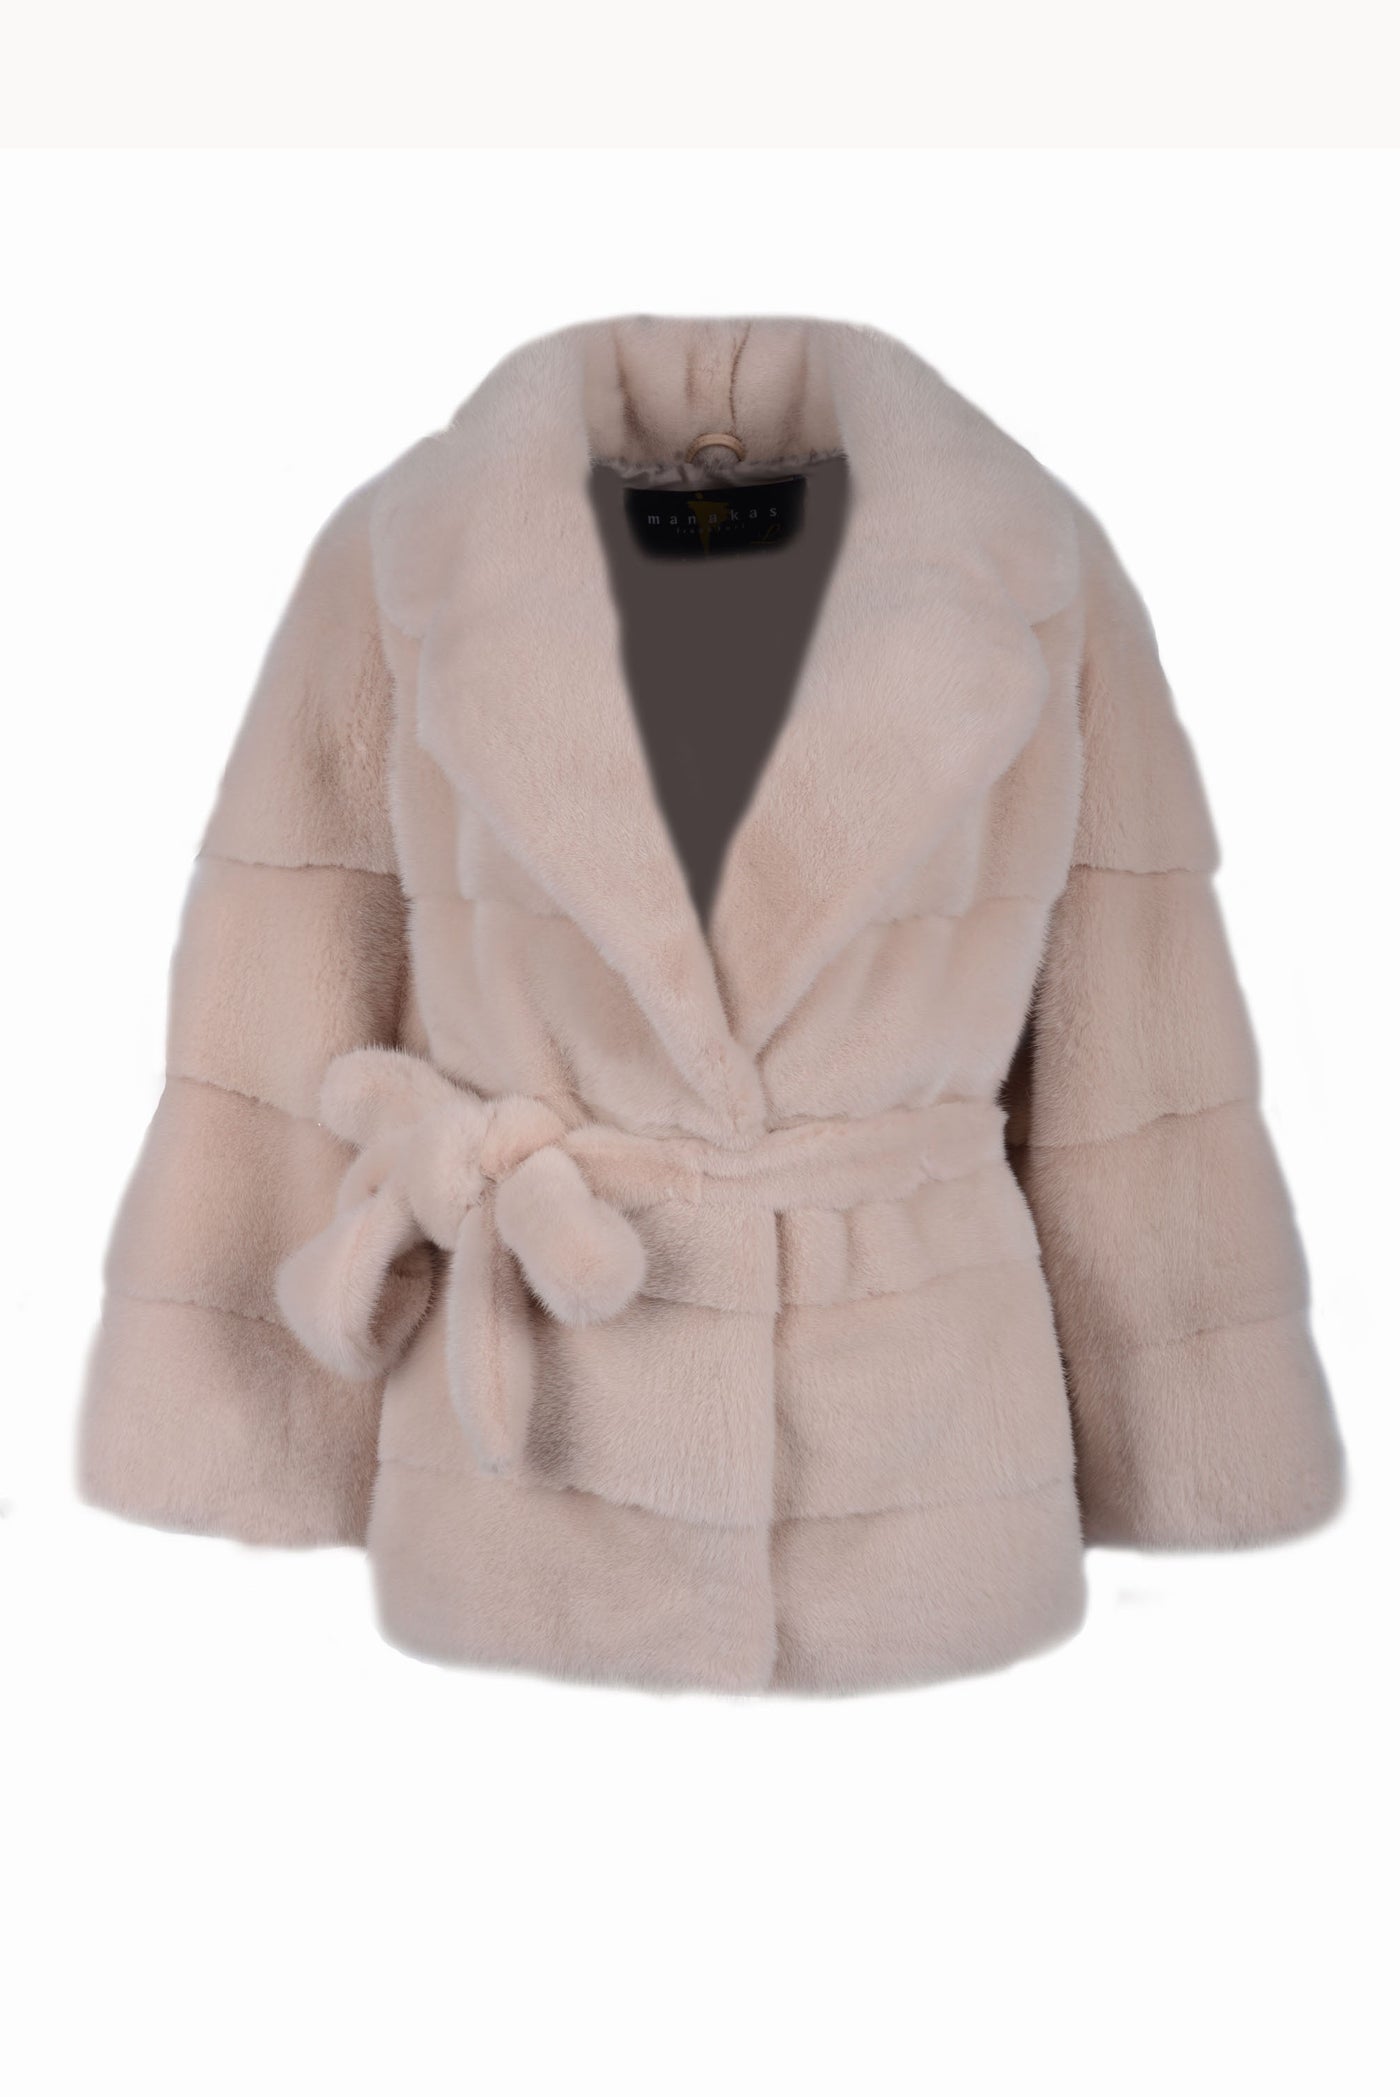 Classy and casual mink fur jacket with english collar